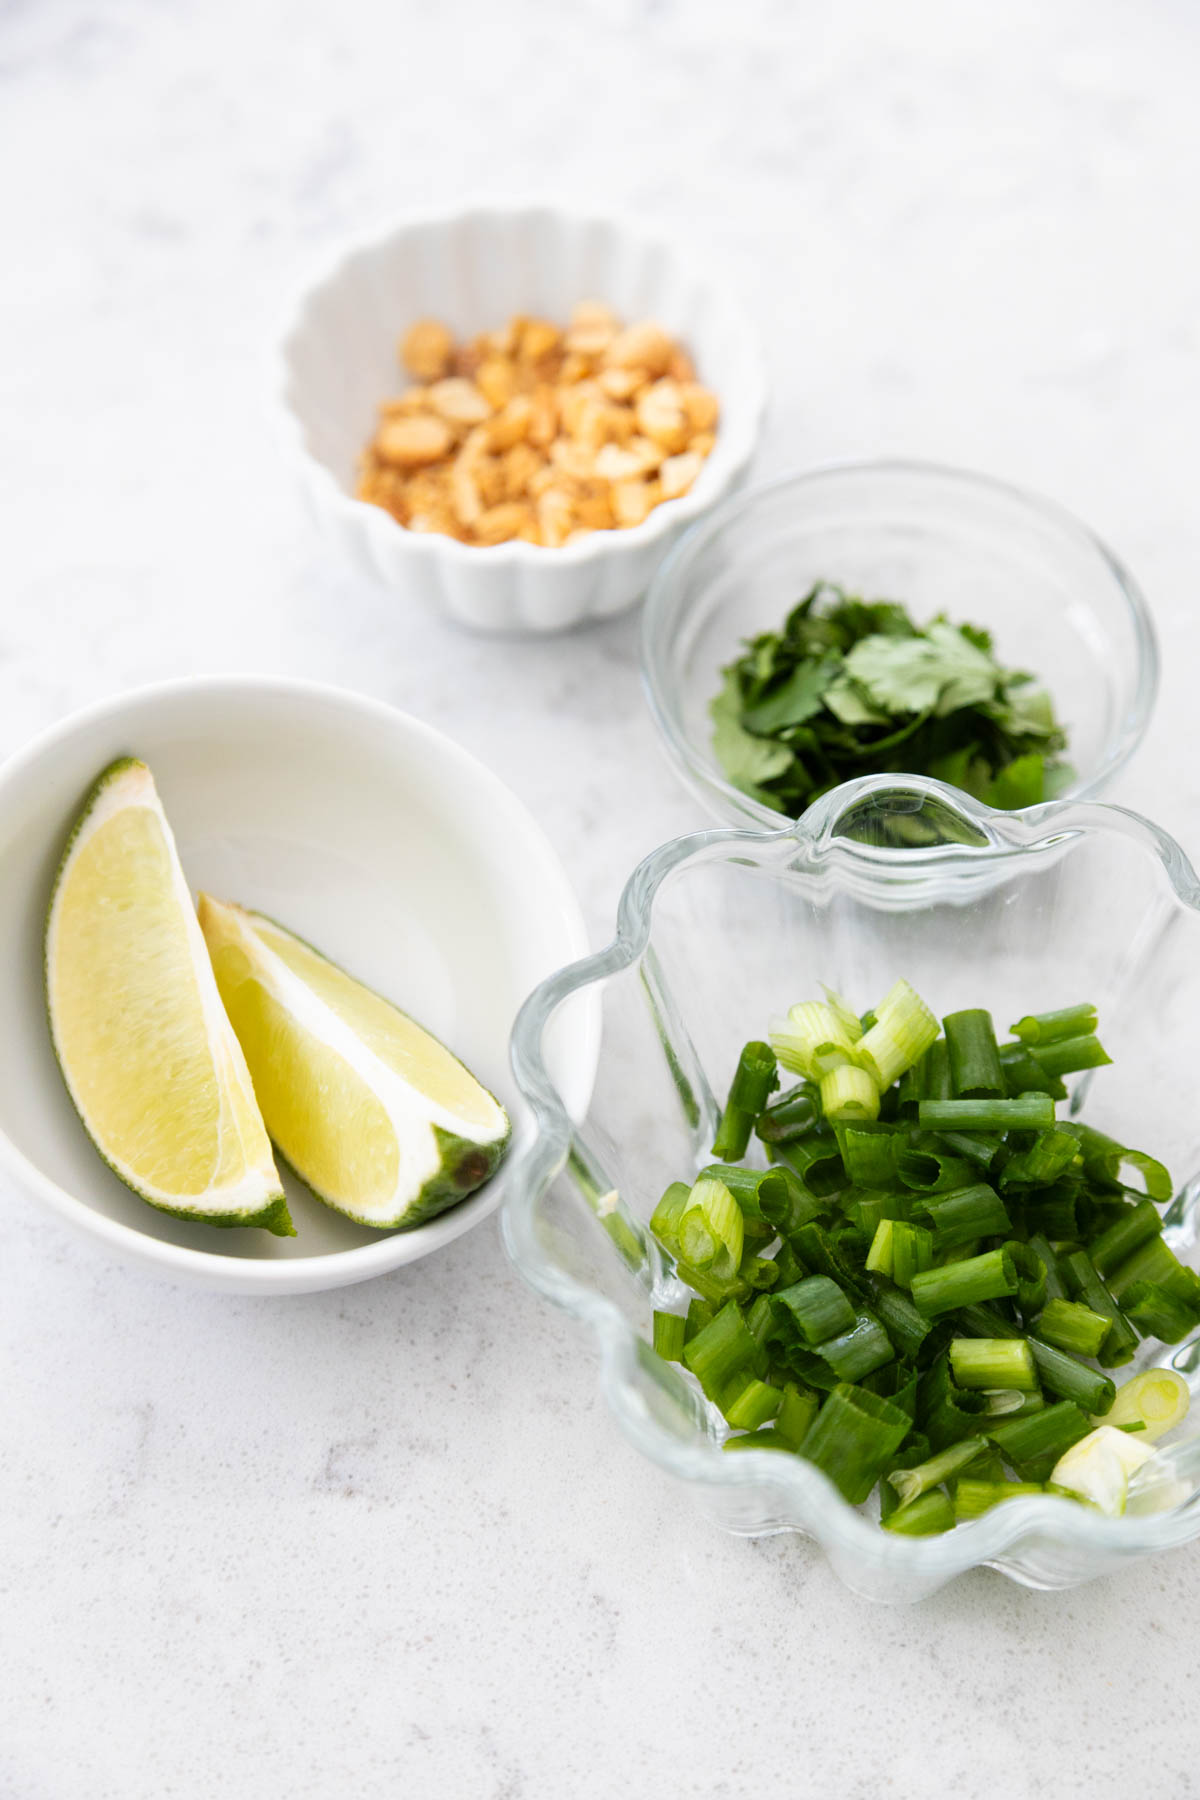 The limes, green onions, chopped peanuts, and cilantro are prepped in small bowls.